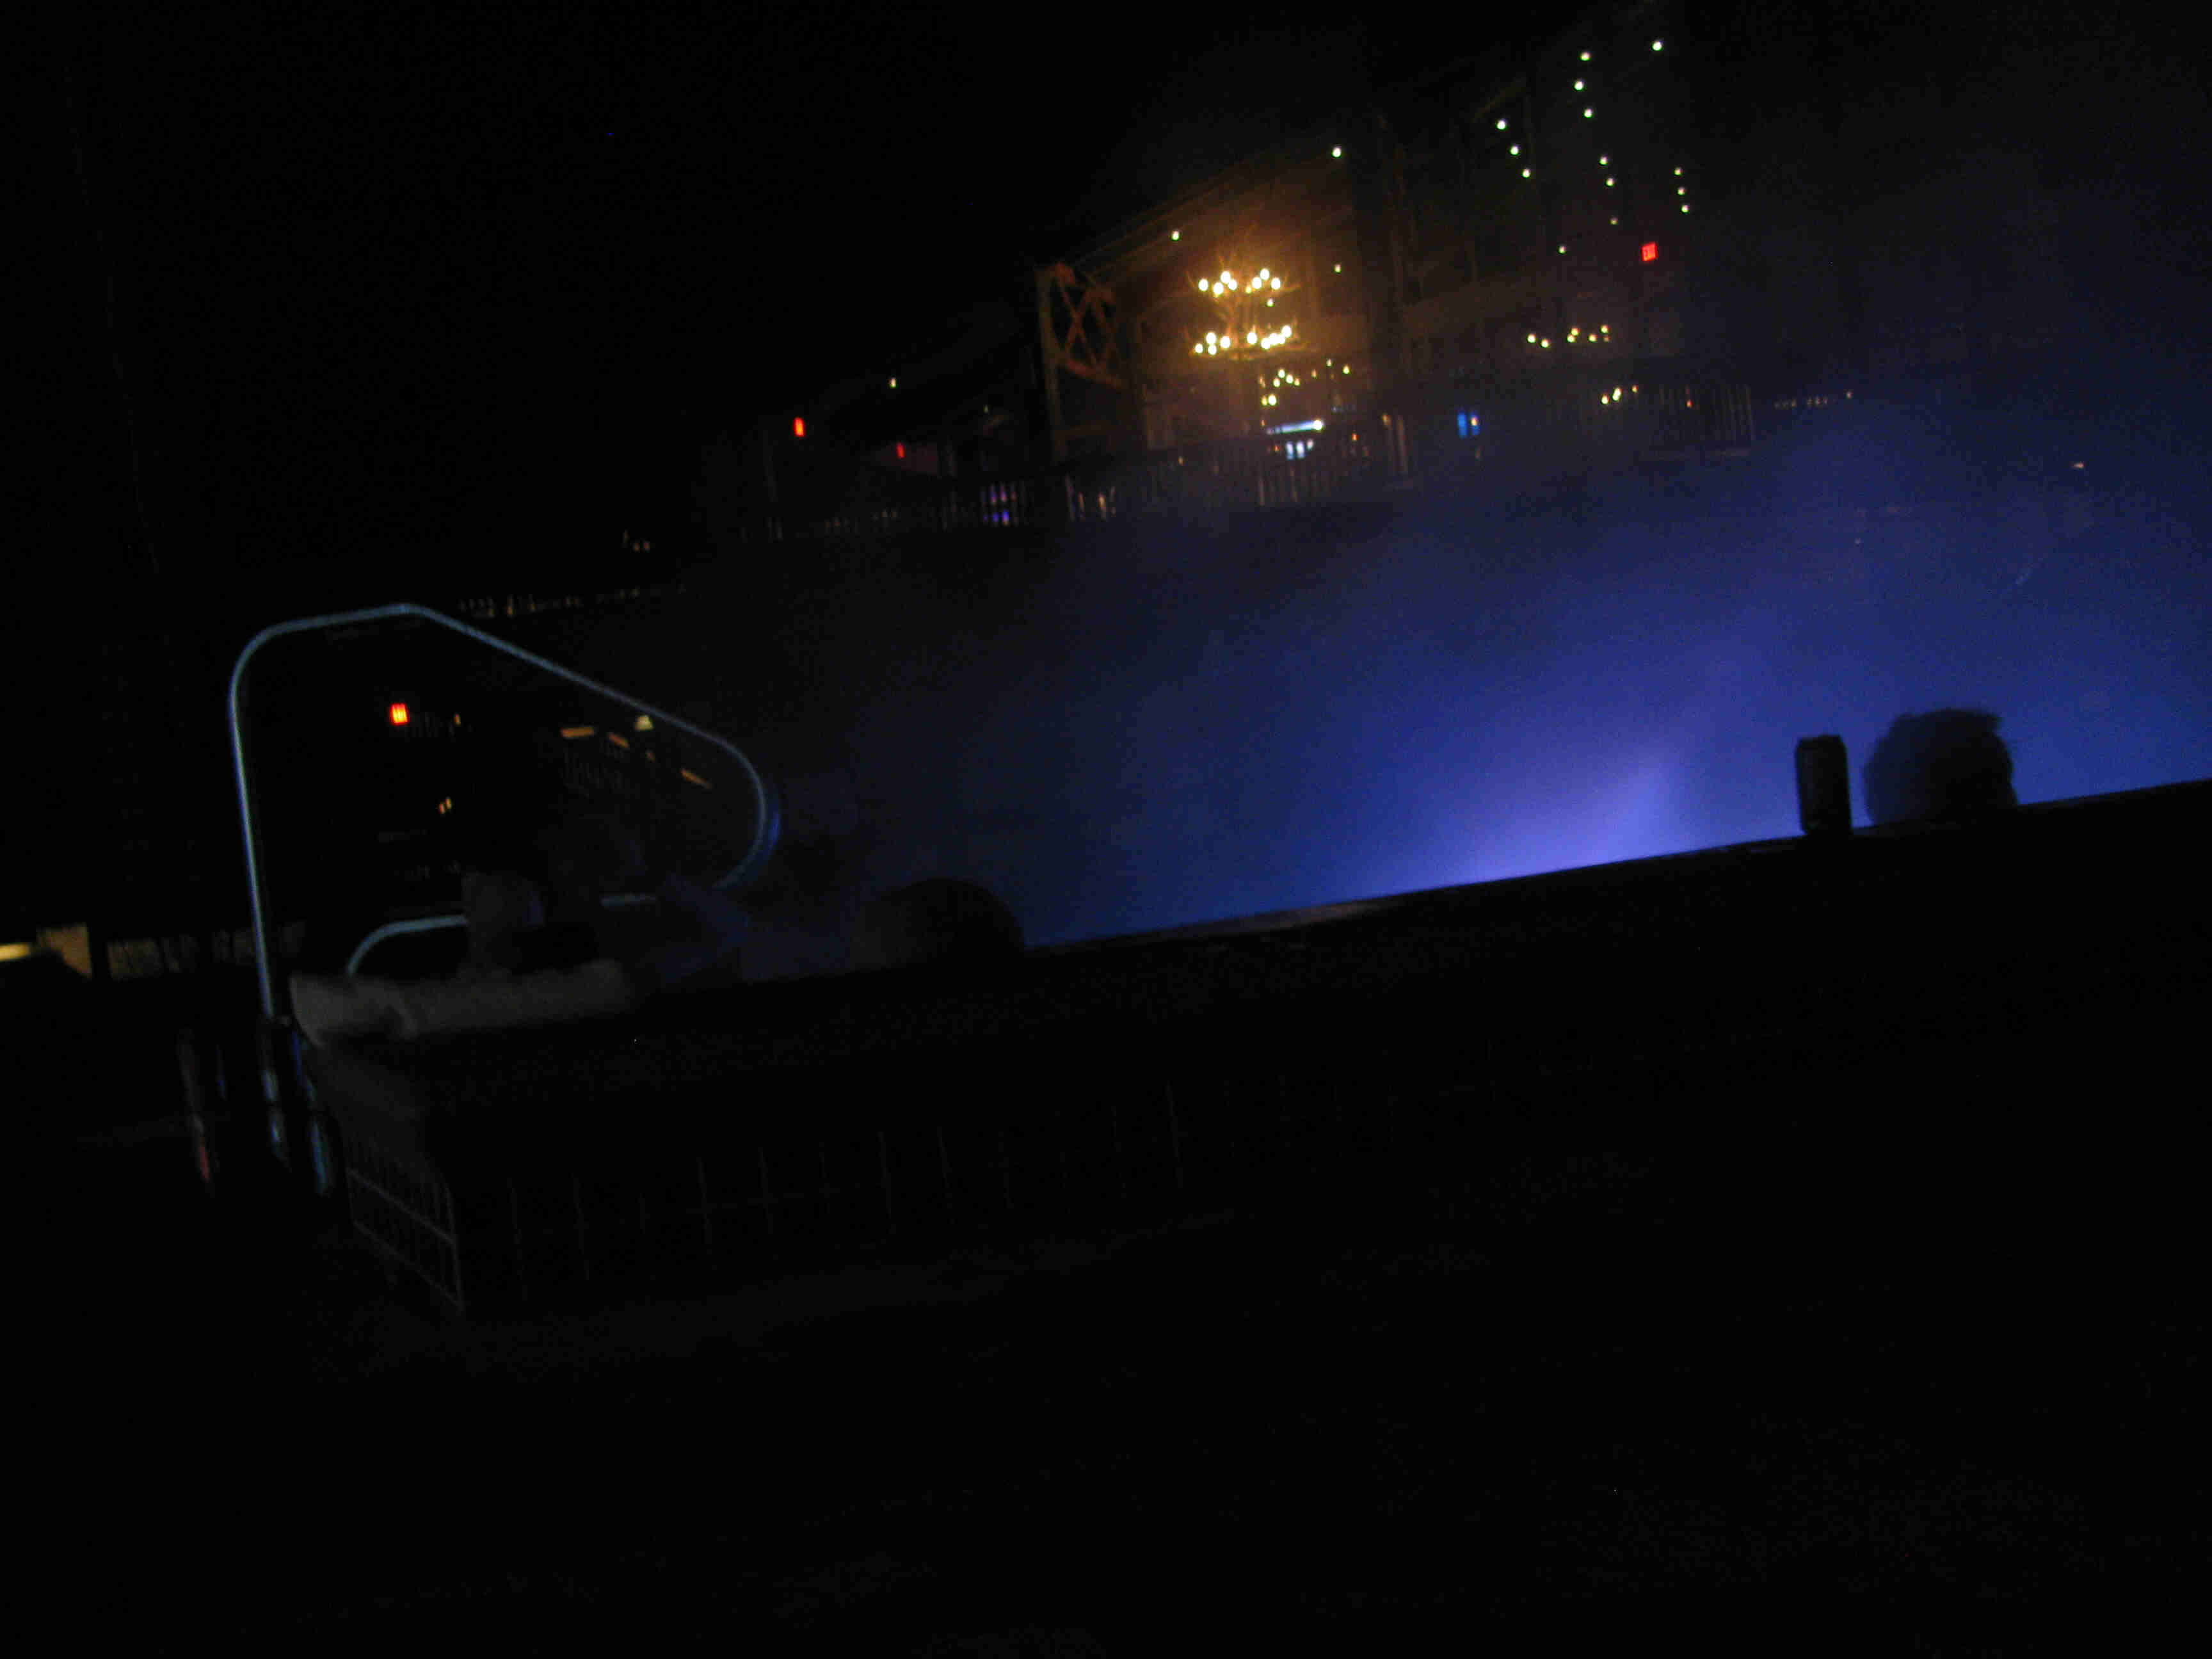 Nighttime view outside of a hot tub with a blue glowing light inside, with lights on a building in the background